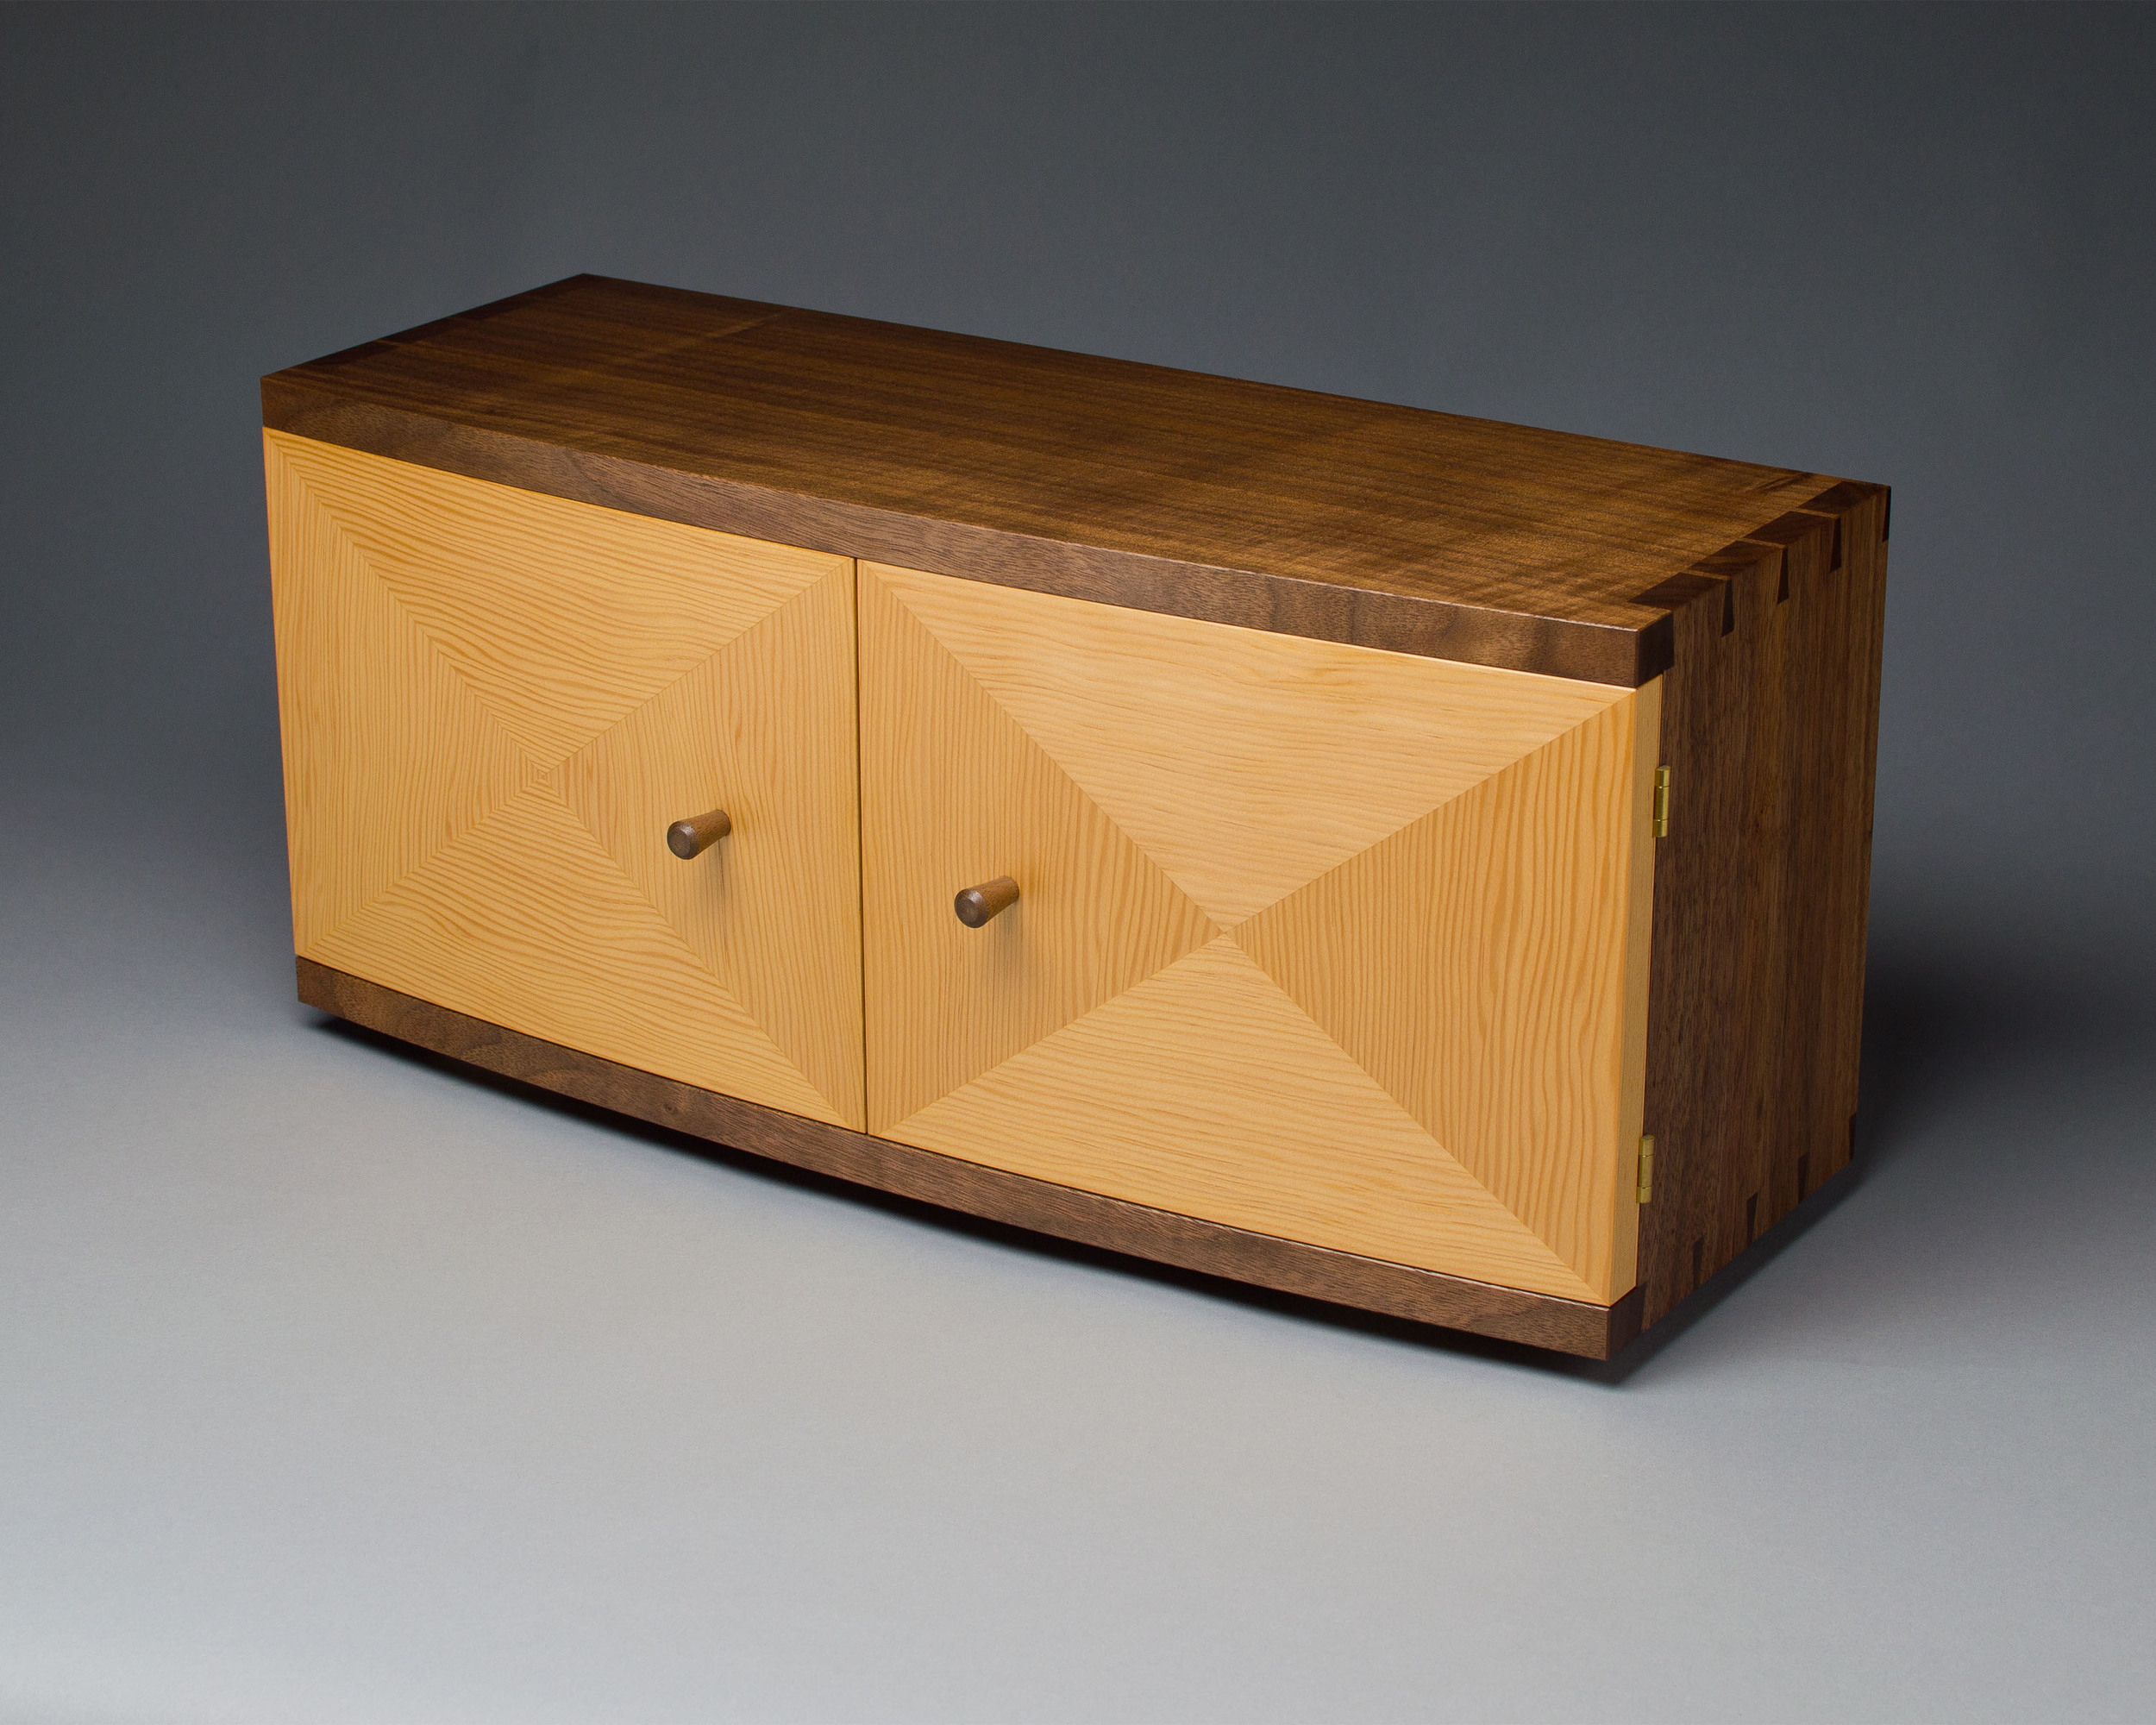 the cabinet case features hand cut dovetail joinery